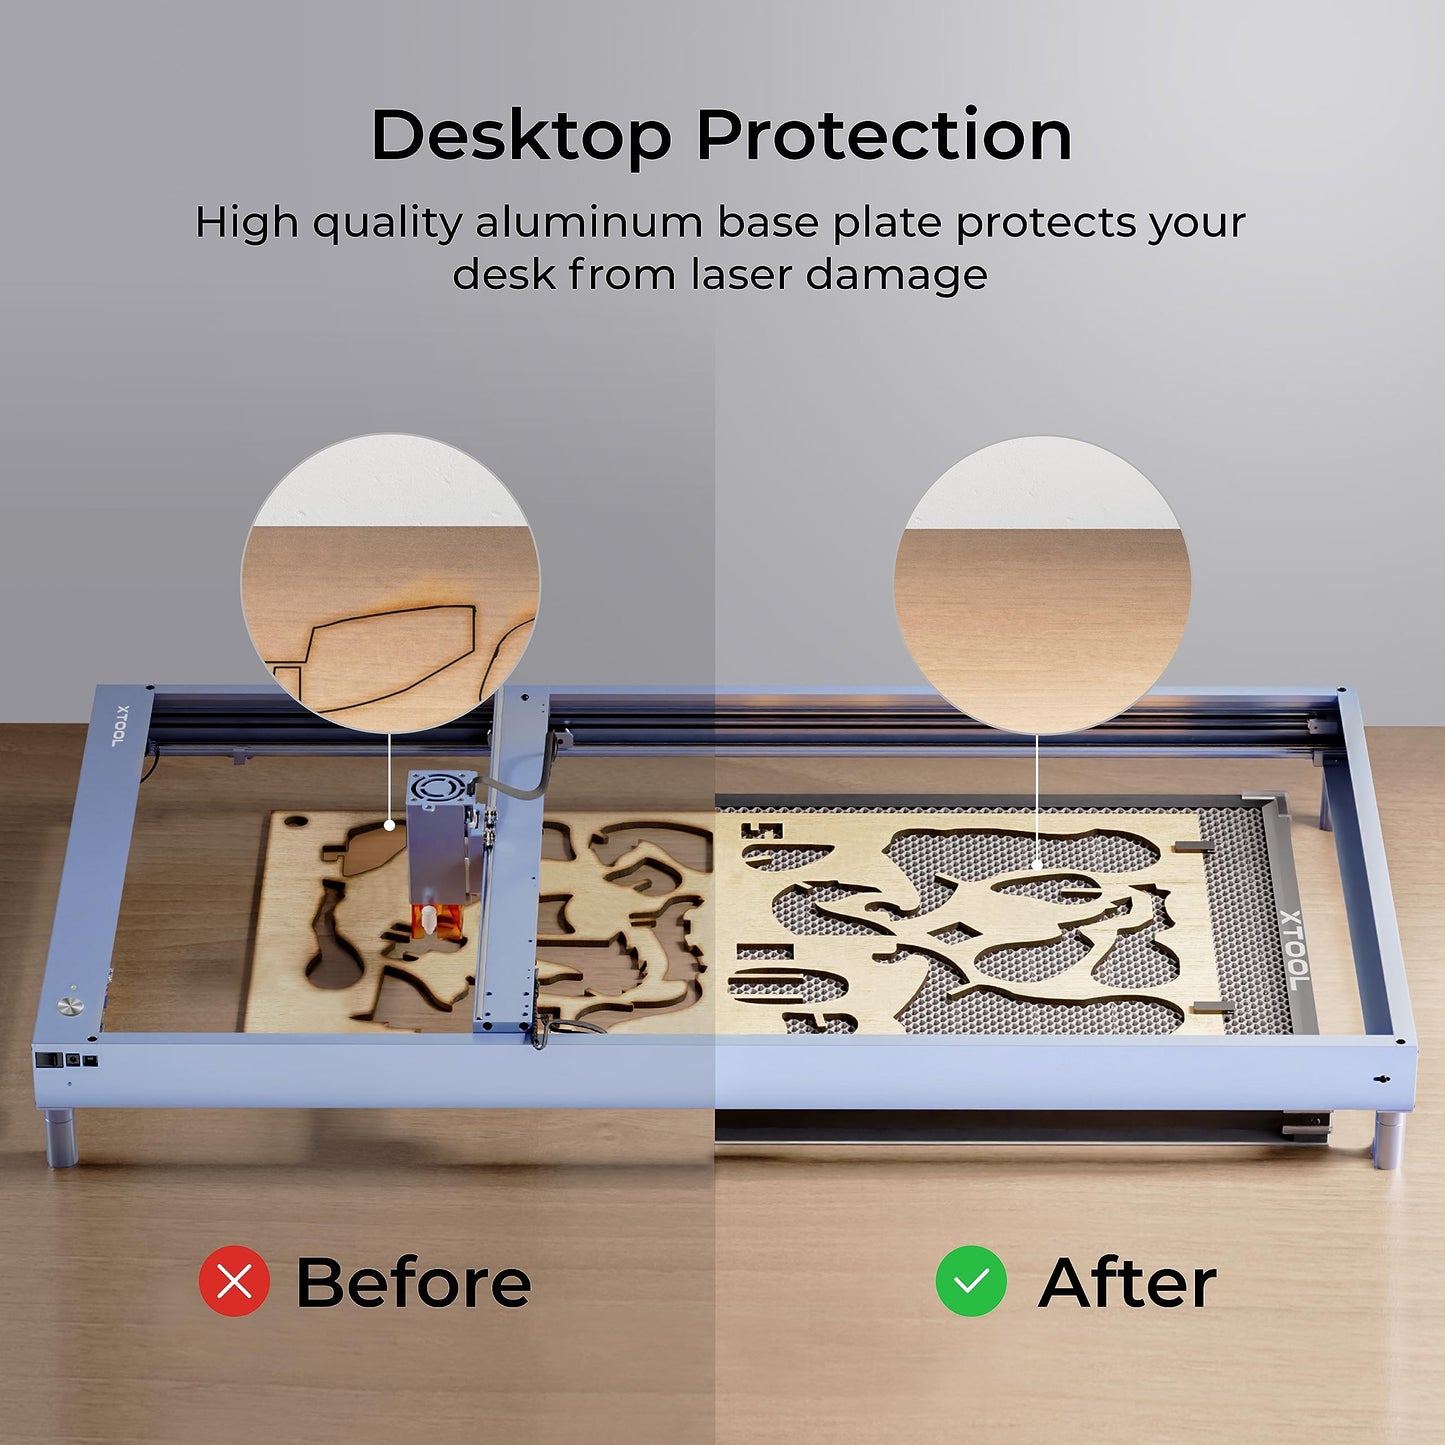 xTool Extension Honeycomb Panel for xTool D1/D1 Pro and Most Laser Engraver and Cutter, Fast Heat Dissipation and Desktop-Protecting for Laser